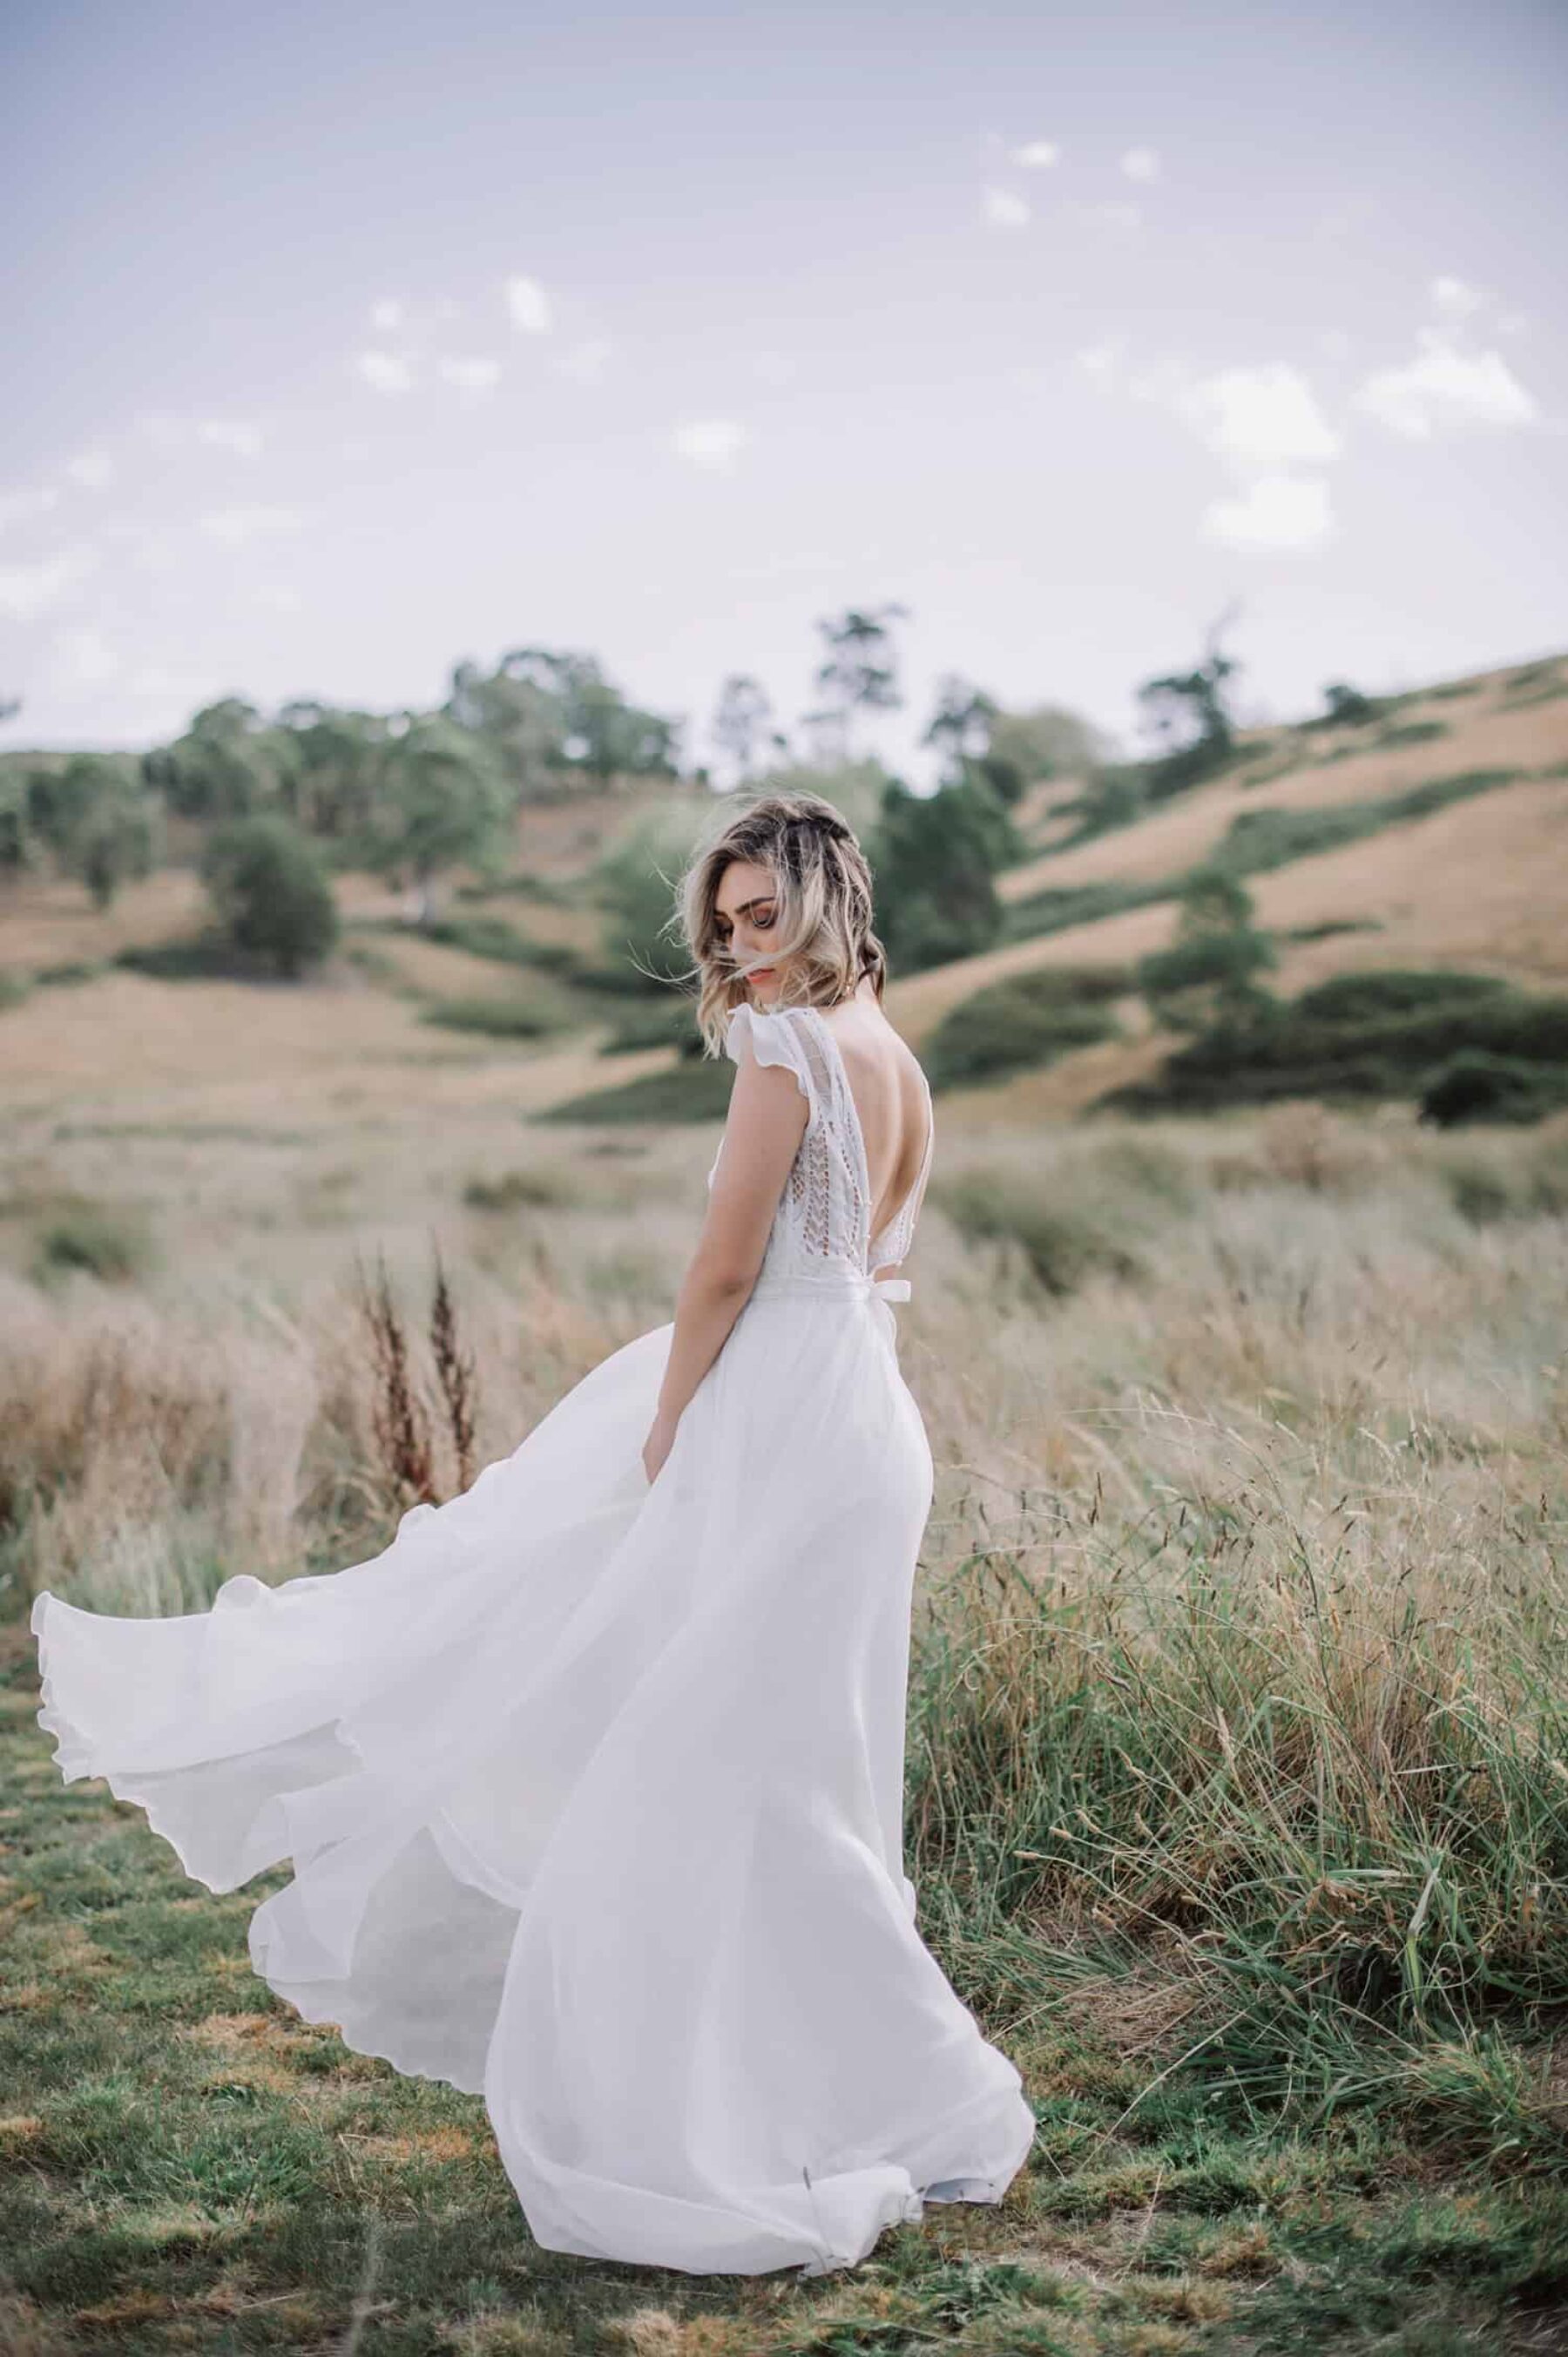 bridal separates collection by Melbourne designer Cathleen Jia